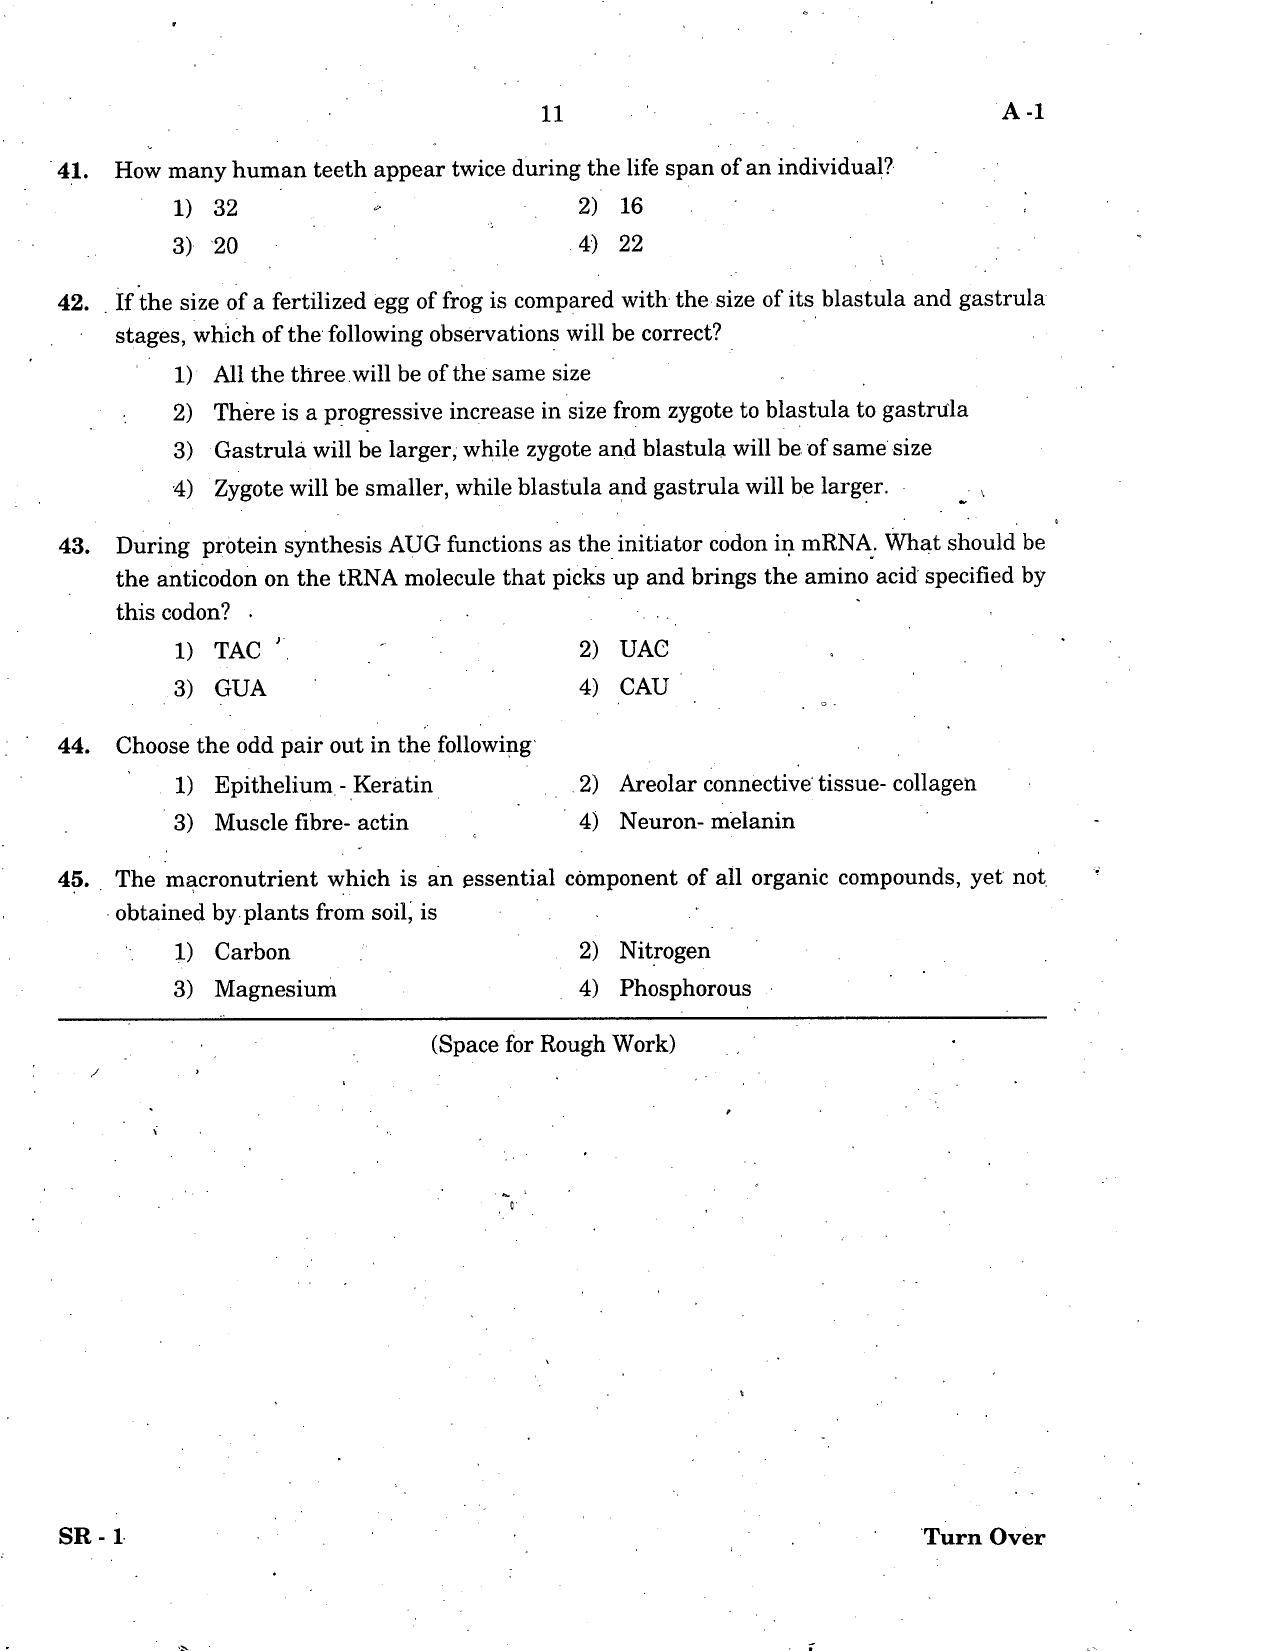 KCET Biology 2005 Question Papers - Page 11